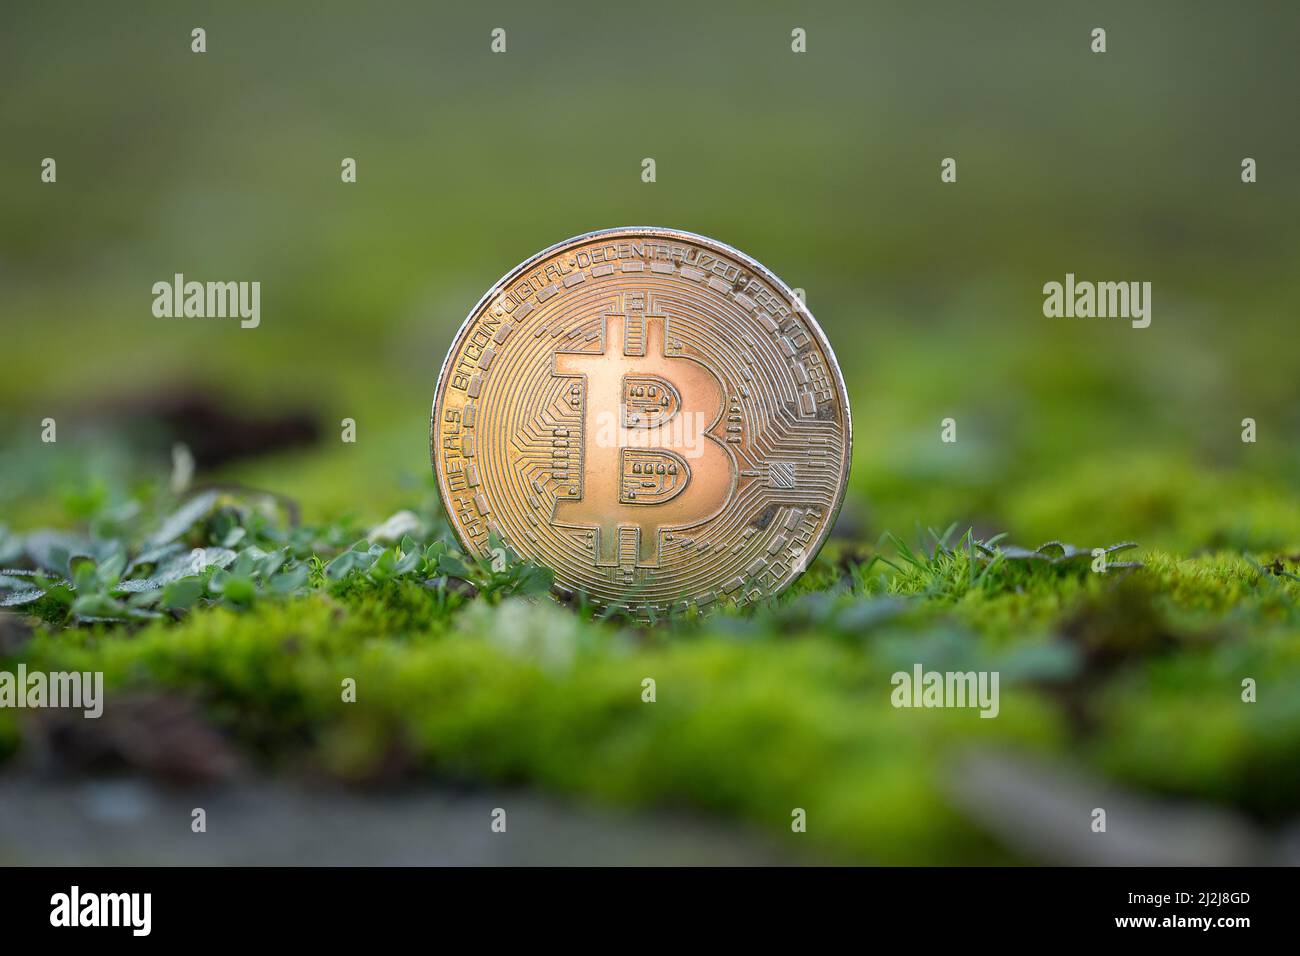 Bitcoin BTC cryptocurrency physical coin placed on the green moss and grass. Macro shot. Framed in the middle of the picture. Stock Photo